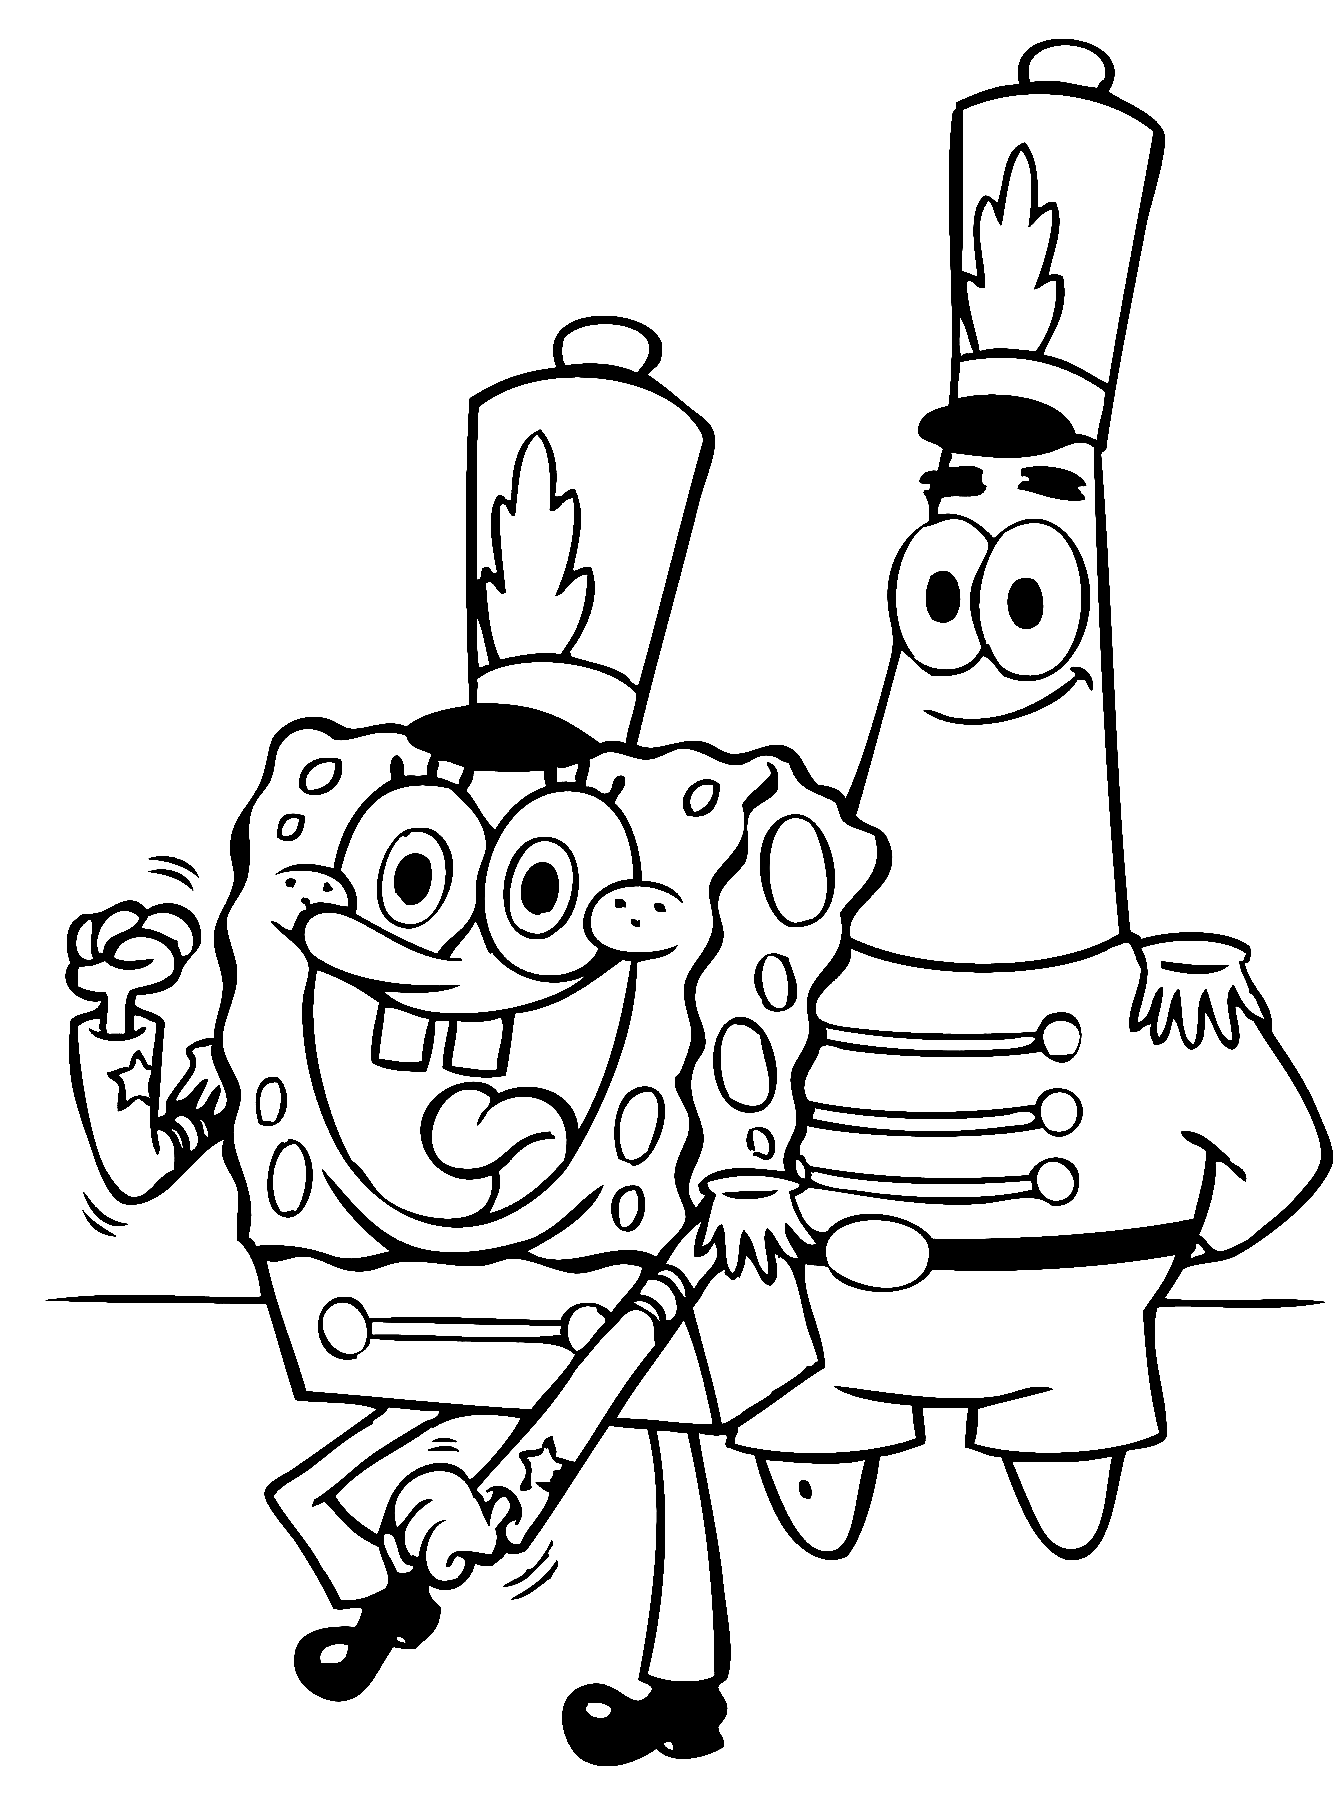 Patrick And Spongebob Coloring Pages